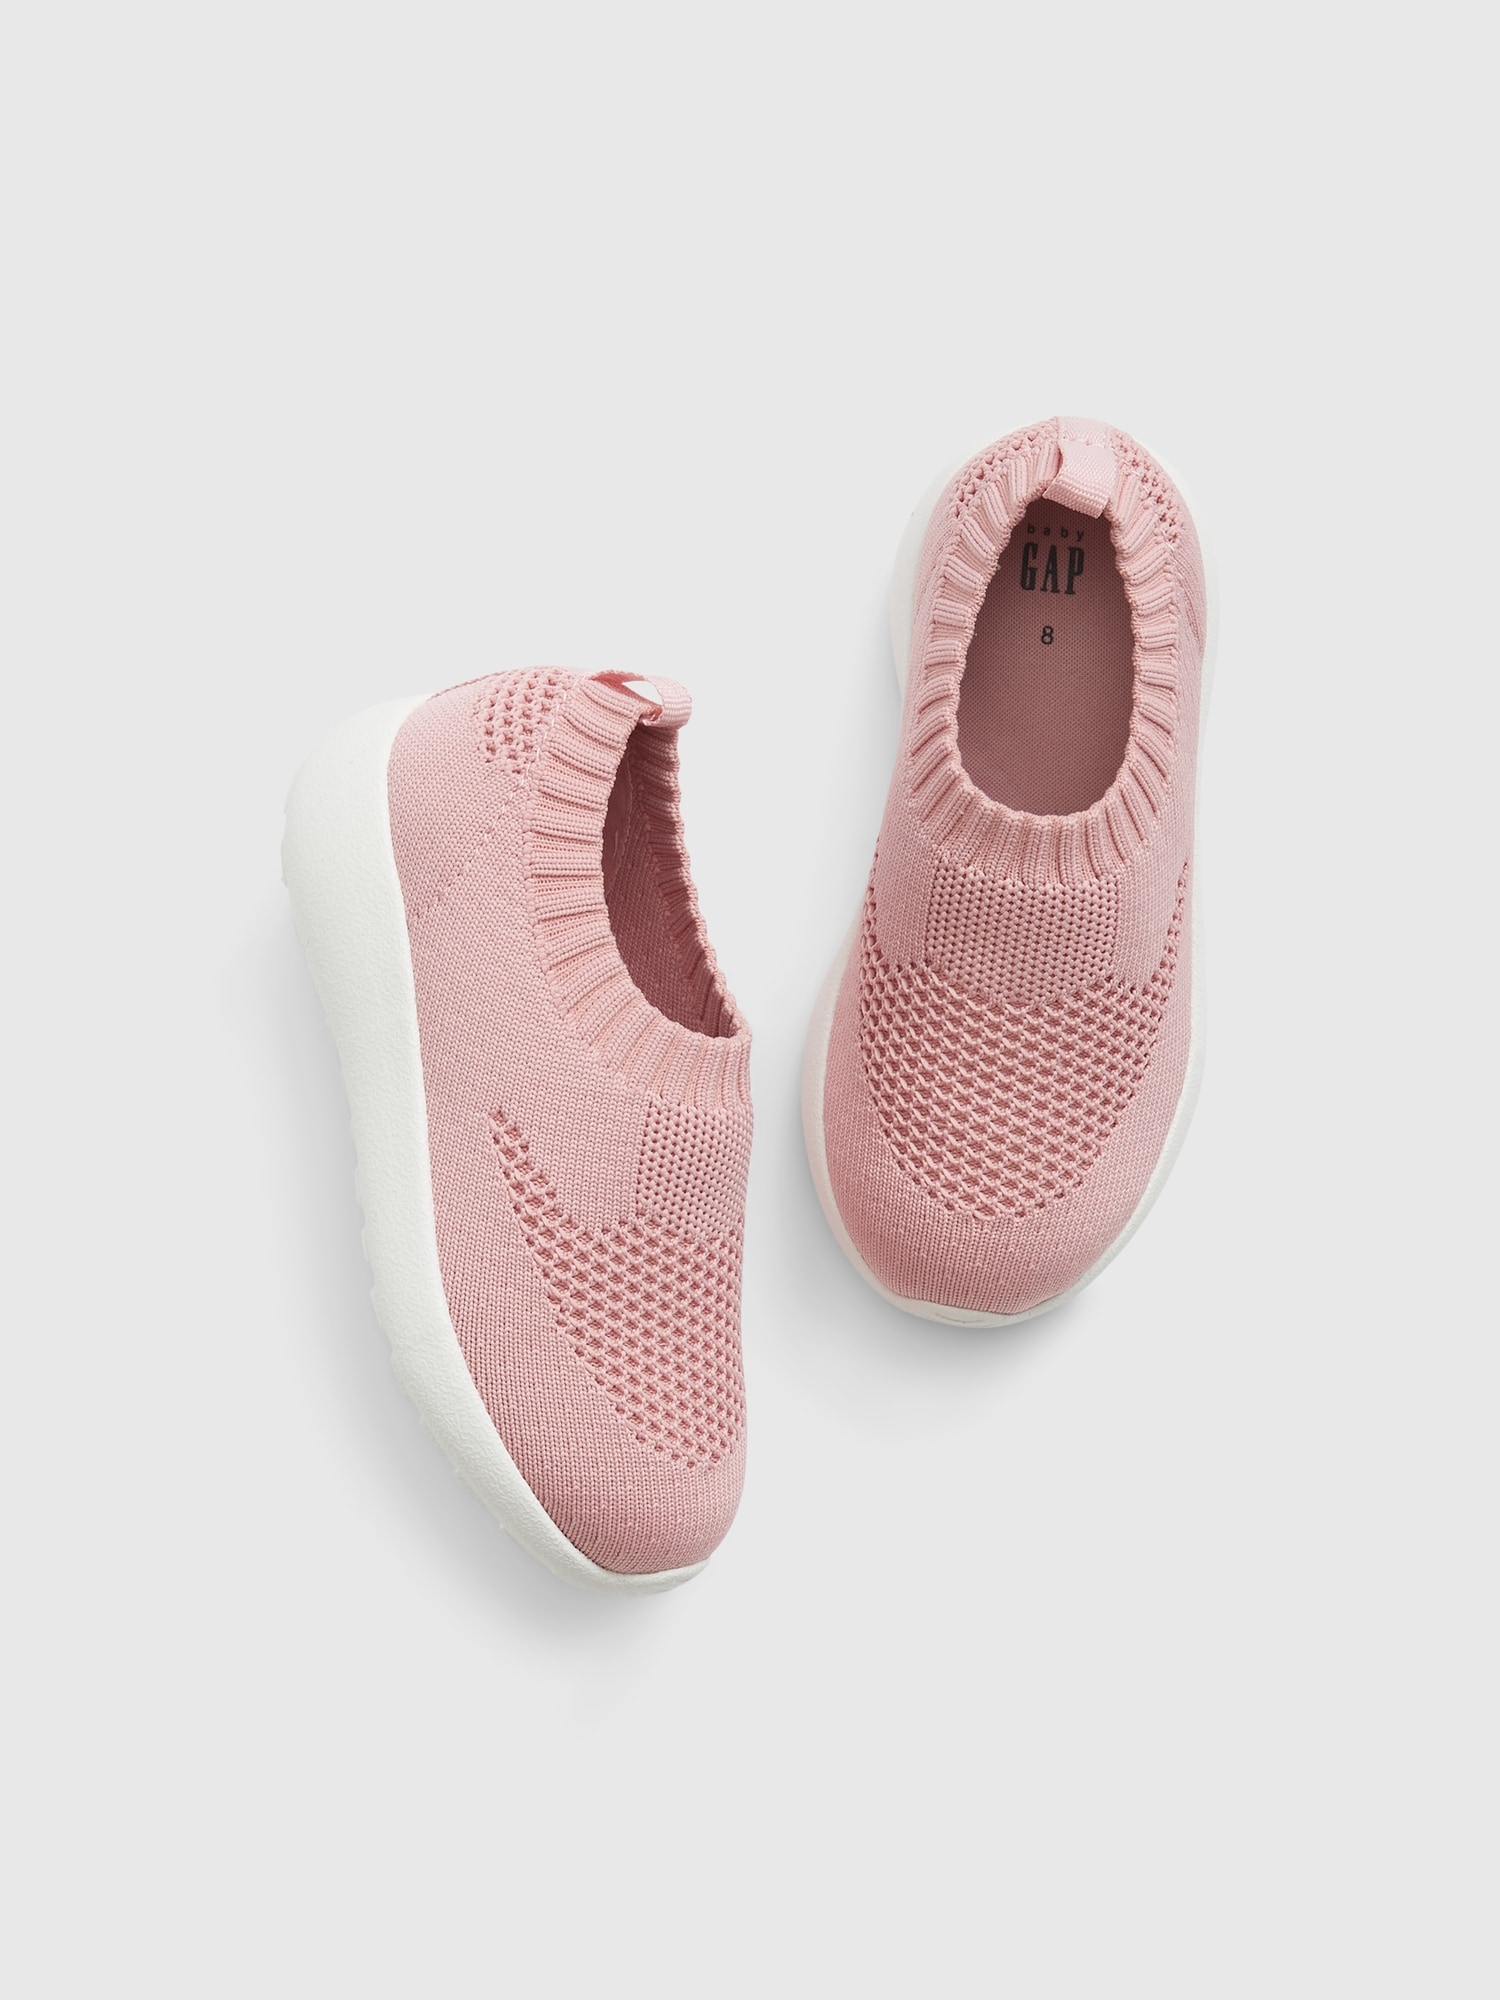 Gap Babies' Toddler Knit Pull-on Sneakers In Pink Standard